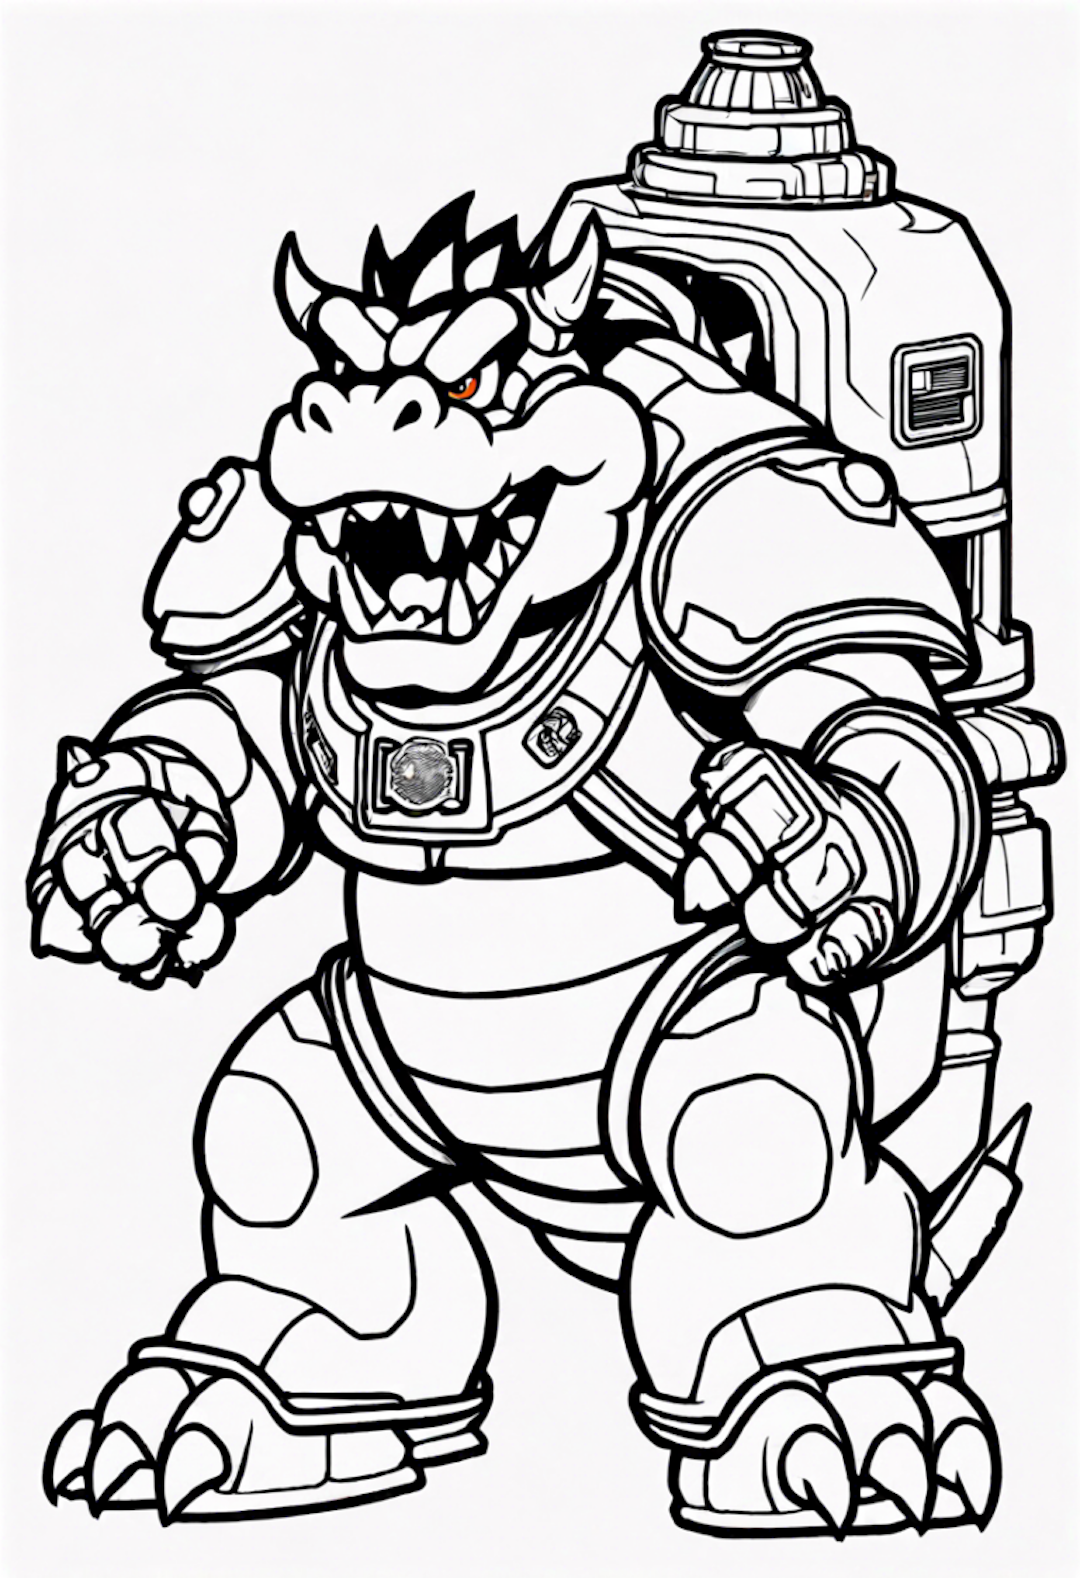 Bowser At The Space Station coloring pages